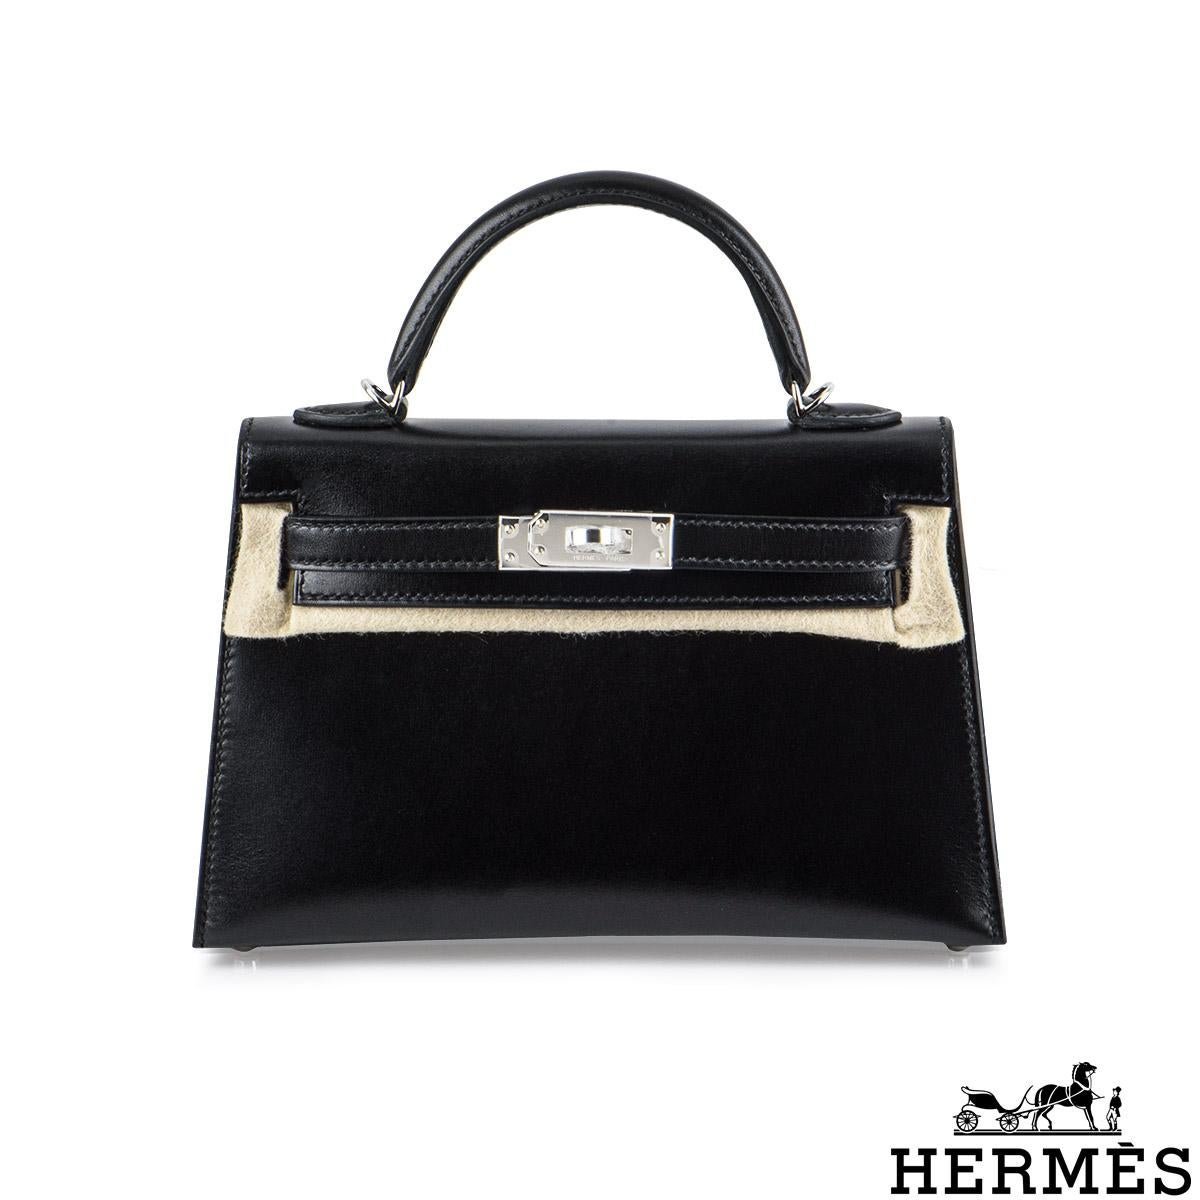 An exquisite Hermès Kelly II Sellier Mini 20cm handbag. The noir box leather bag is detailed with palladium hardware. The exterior of this Kelly Mini features a Sellier style in veau box leather. It has a front toggle closure, a single rolled handle